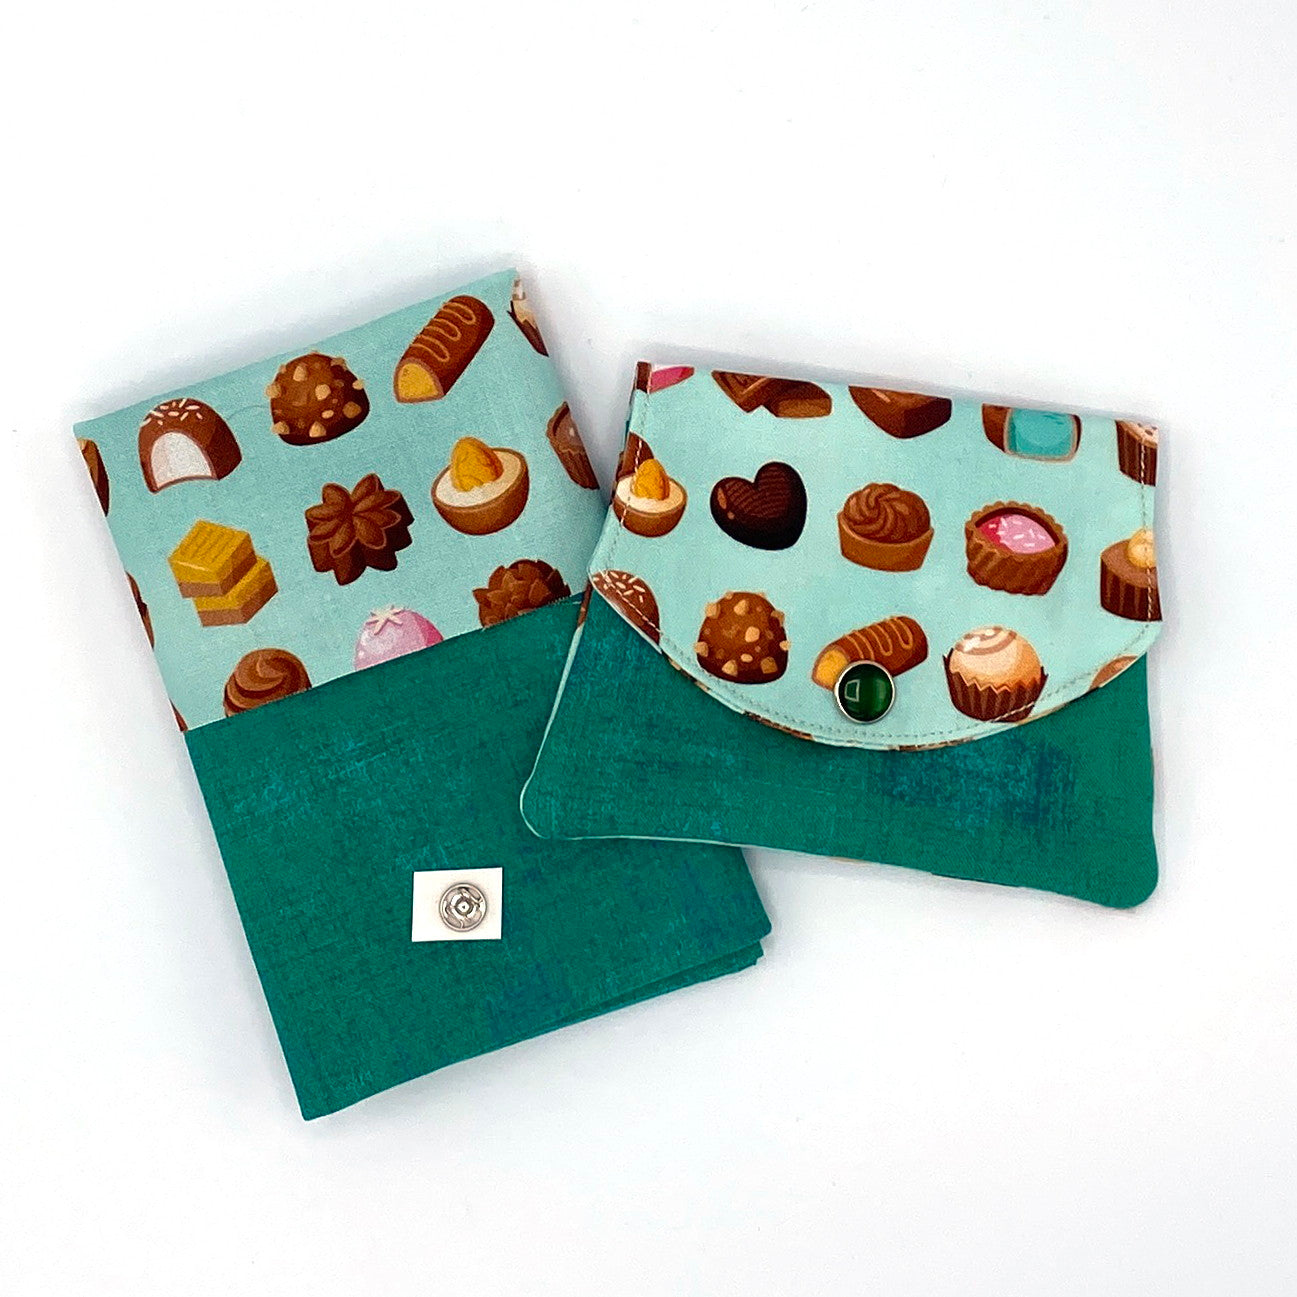 Chocolate Candy Little Wallet Kit